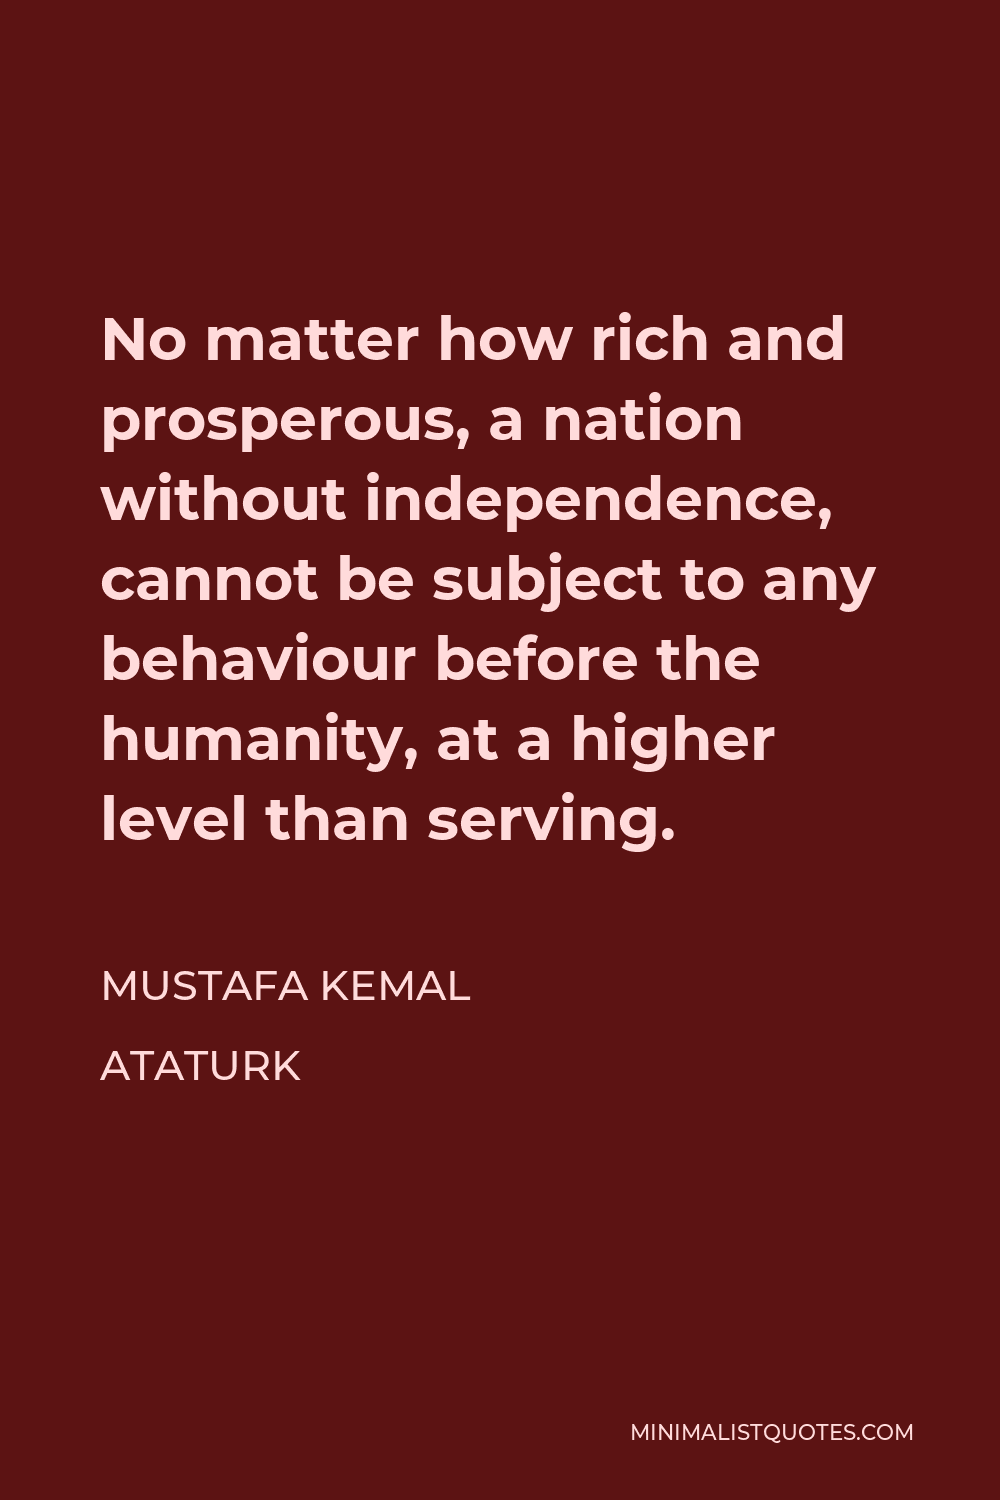 Mustafa Kemal Ataturk Quote - No matter how rich and prosperous, a nation without independence, cannot be subject to any behaviour before the humanity, at a higher level than serving.